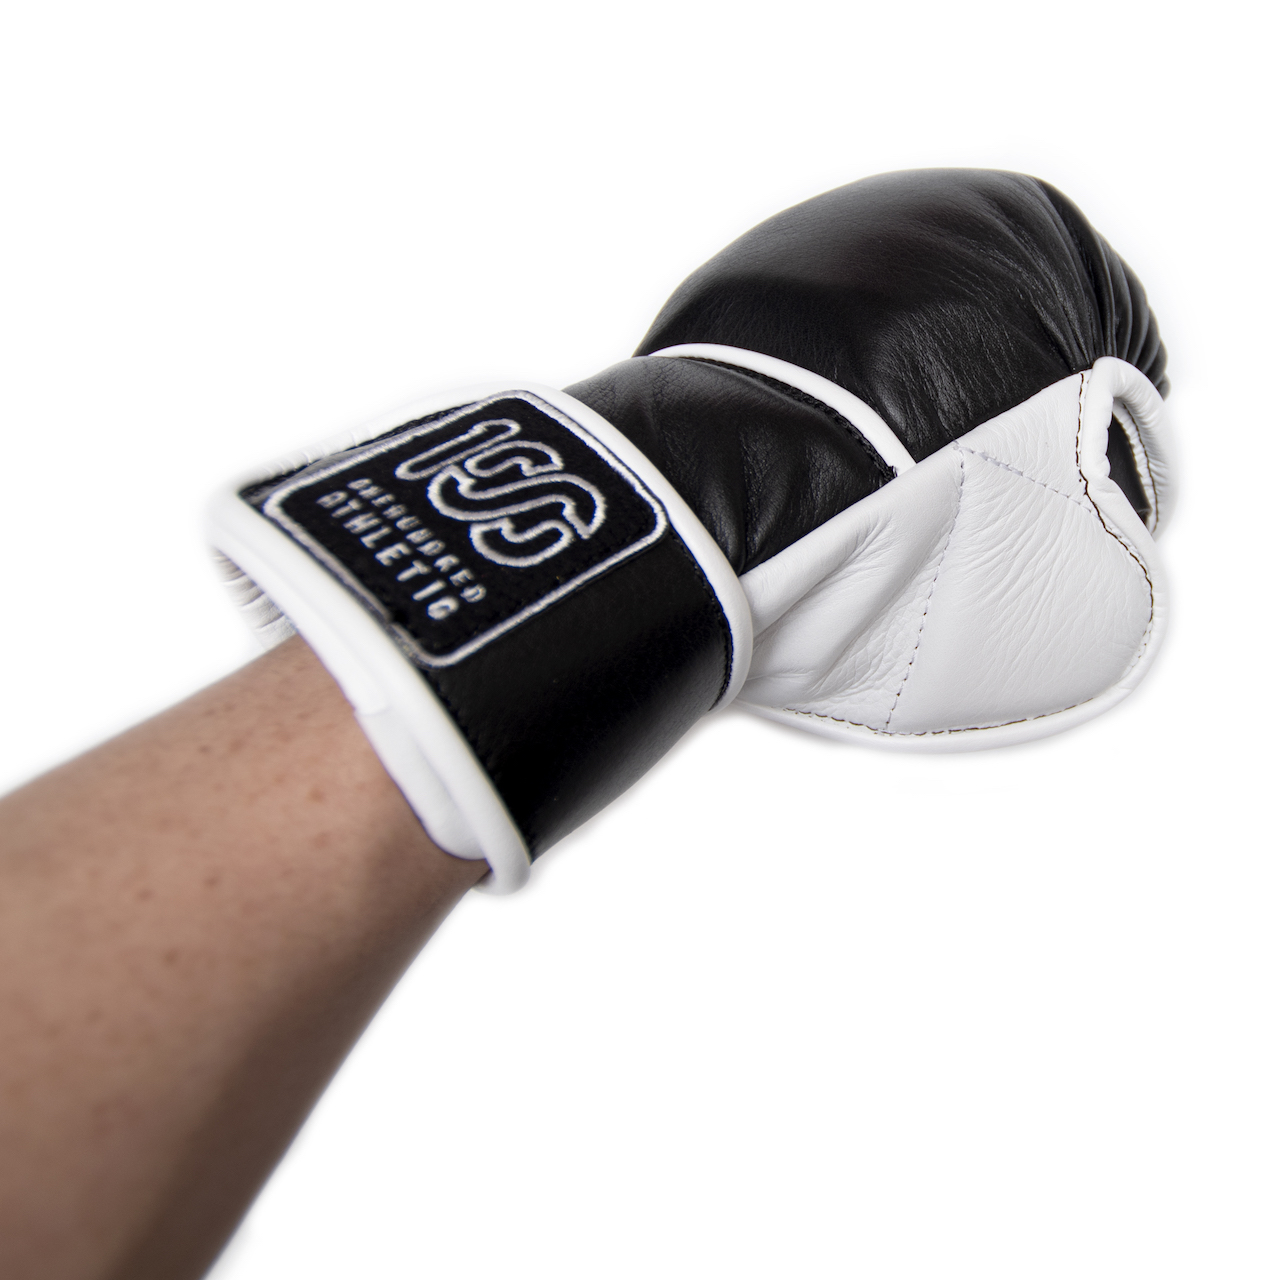 UCS ONLINE STORE / 100A MMA POUNDING GLOVES